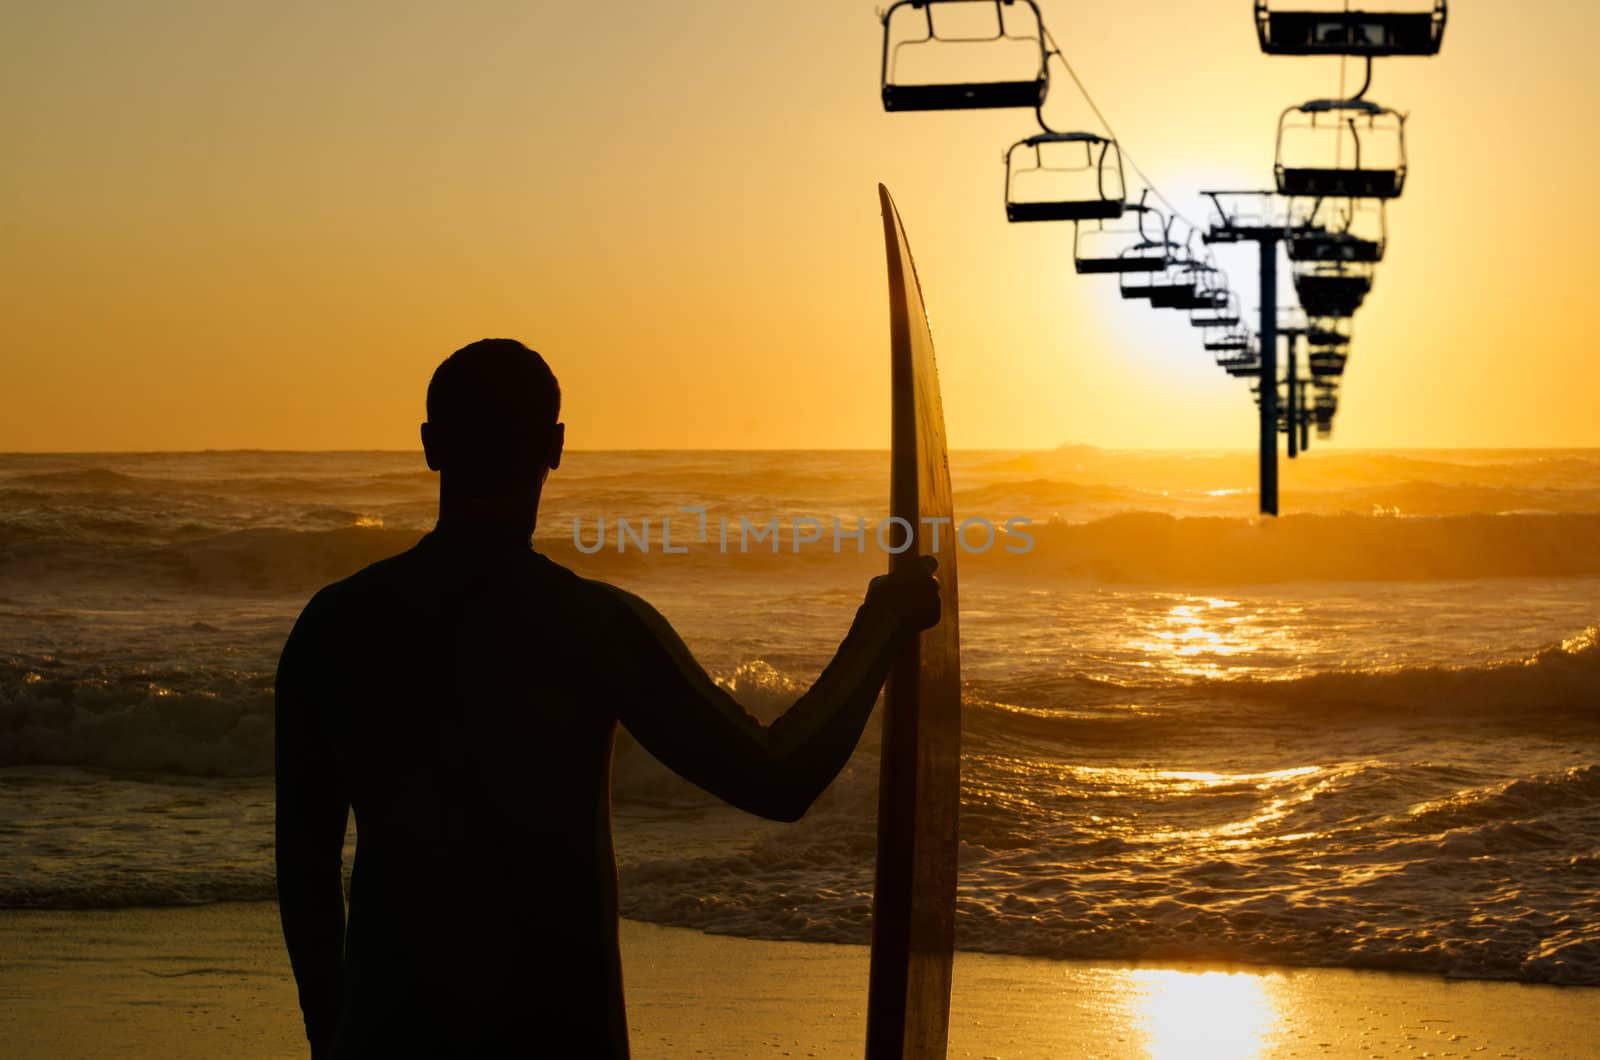 Surfer watching the ocean waves and a chair lift  transport system at sunset.